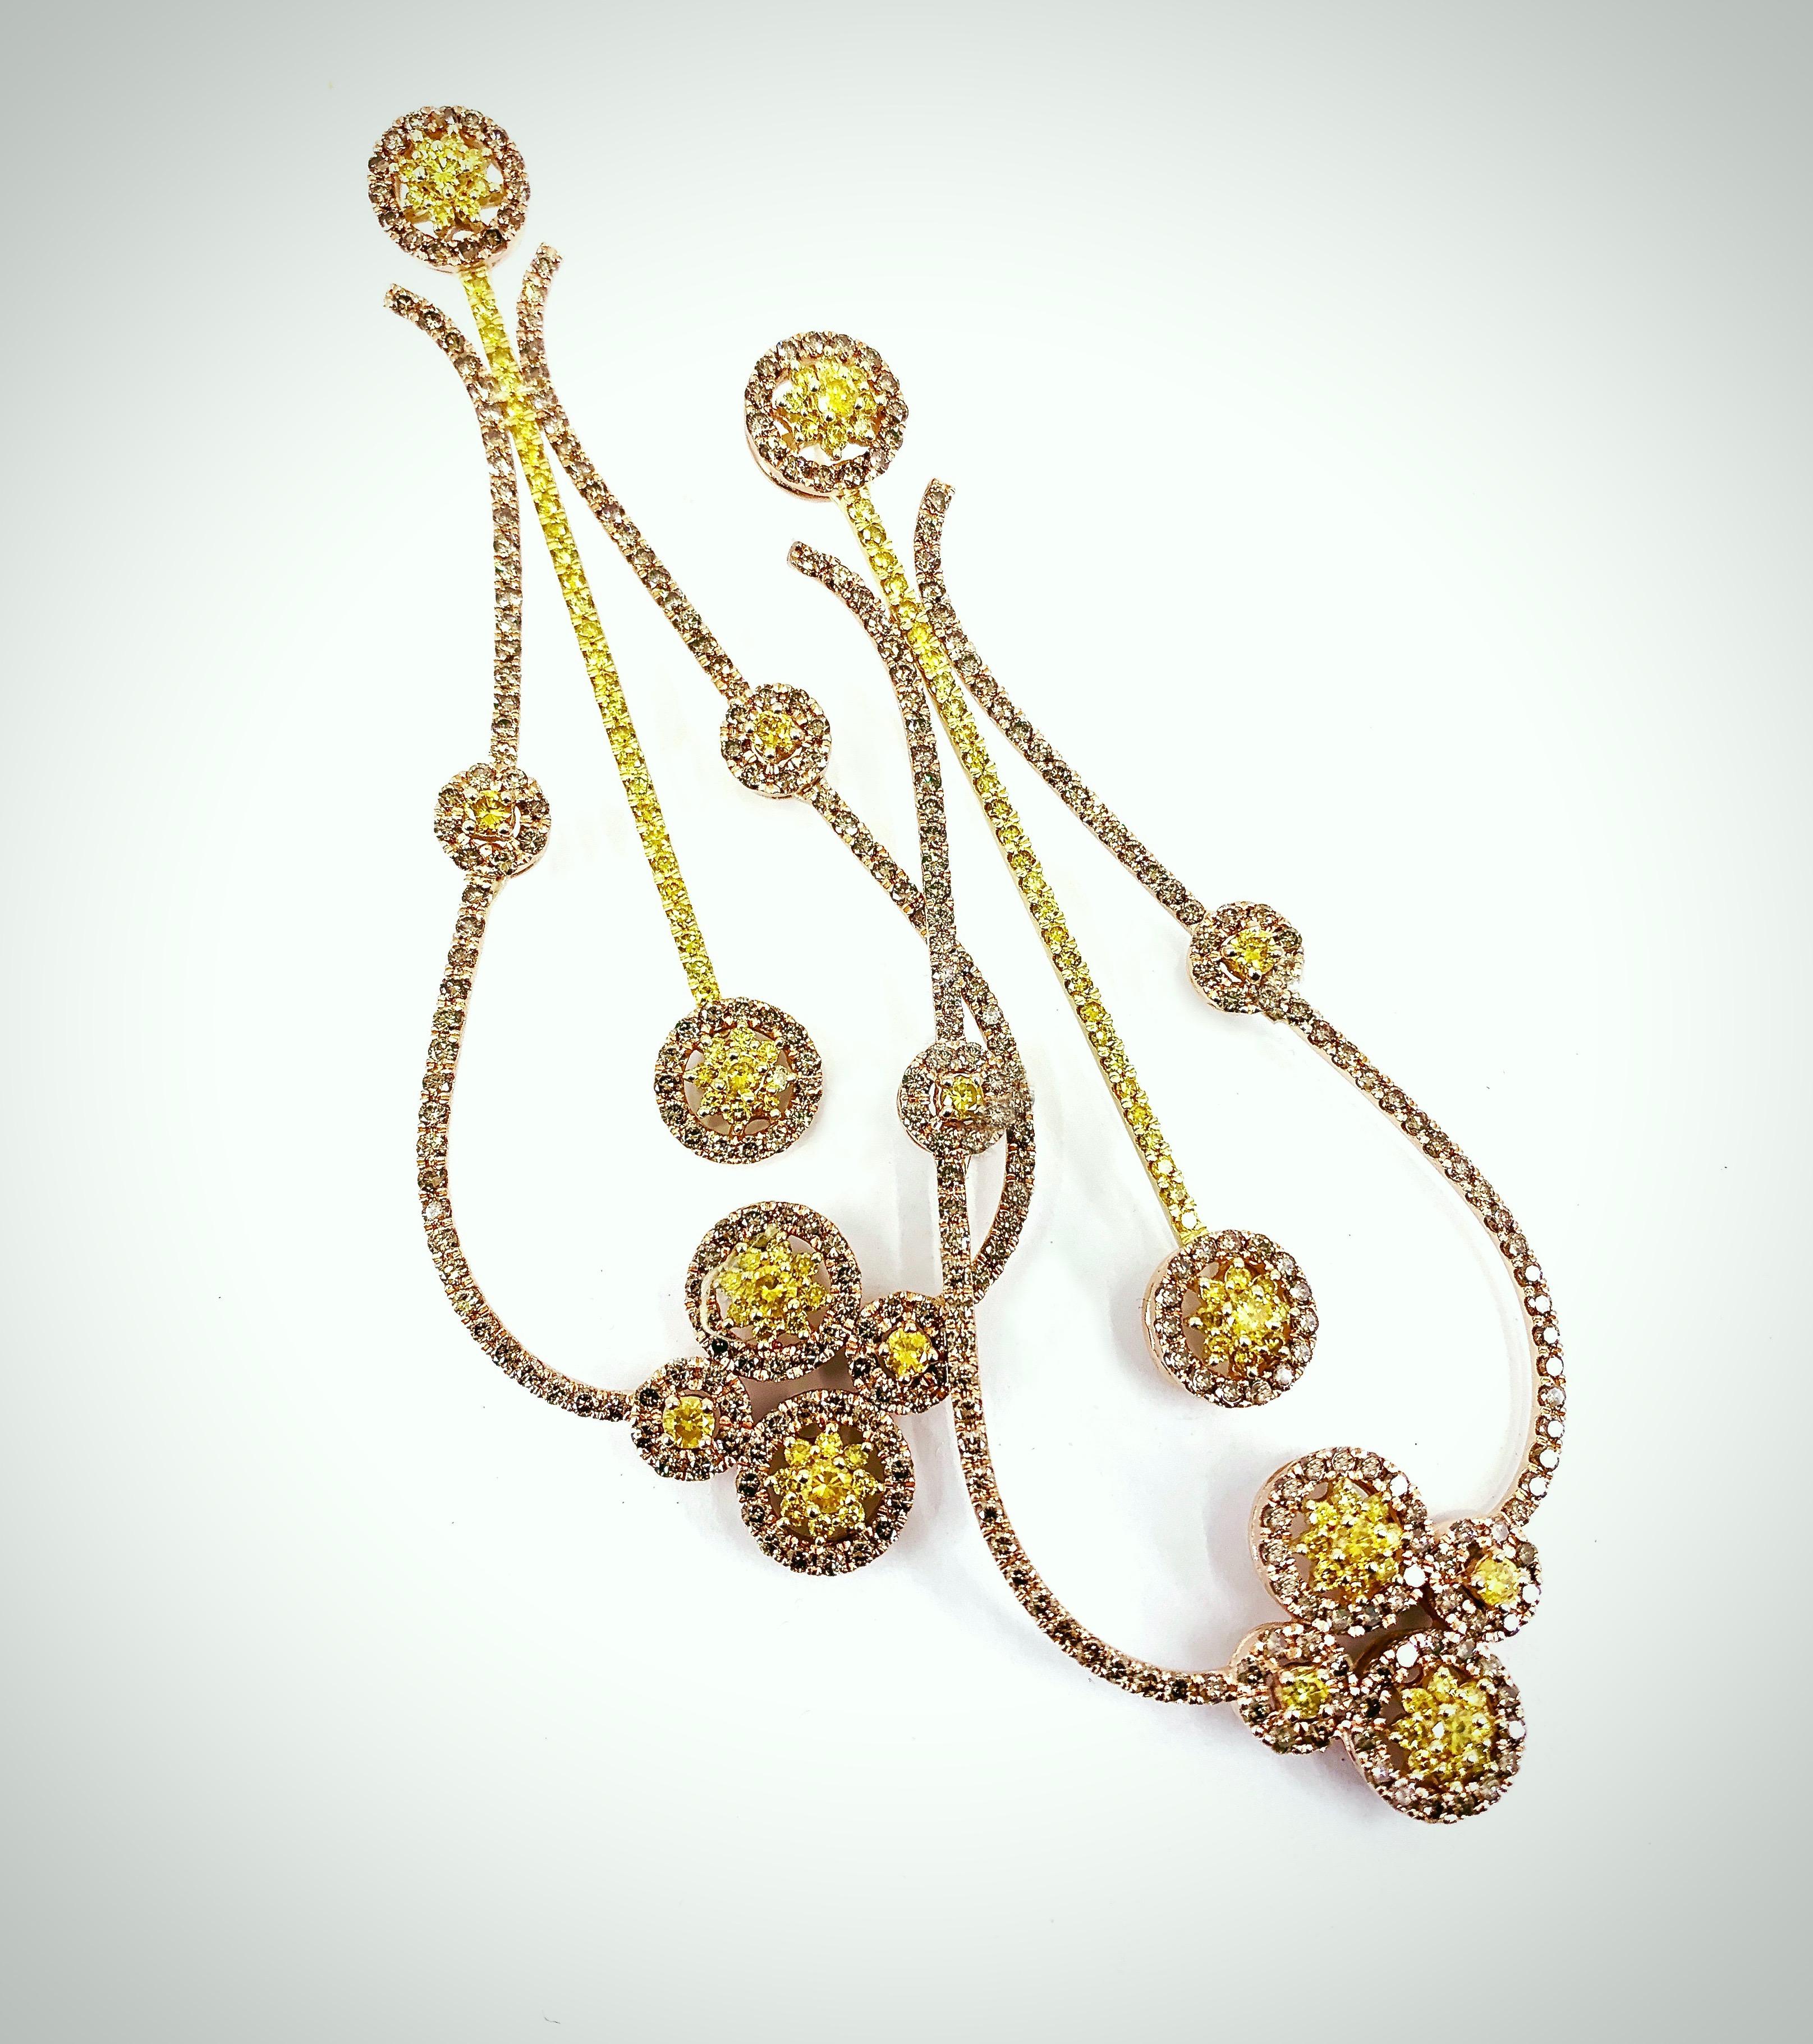 Brilliant Cut 10.05 Carat Pink & Yellow Diamond Chandelier Earrings in Rose & Yellow Gold For Sale